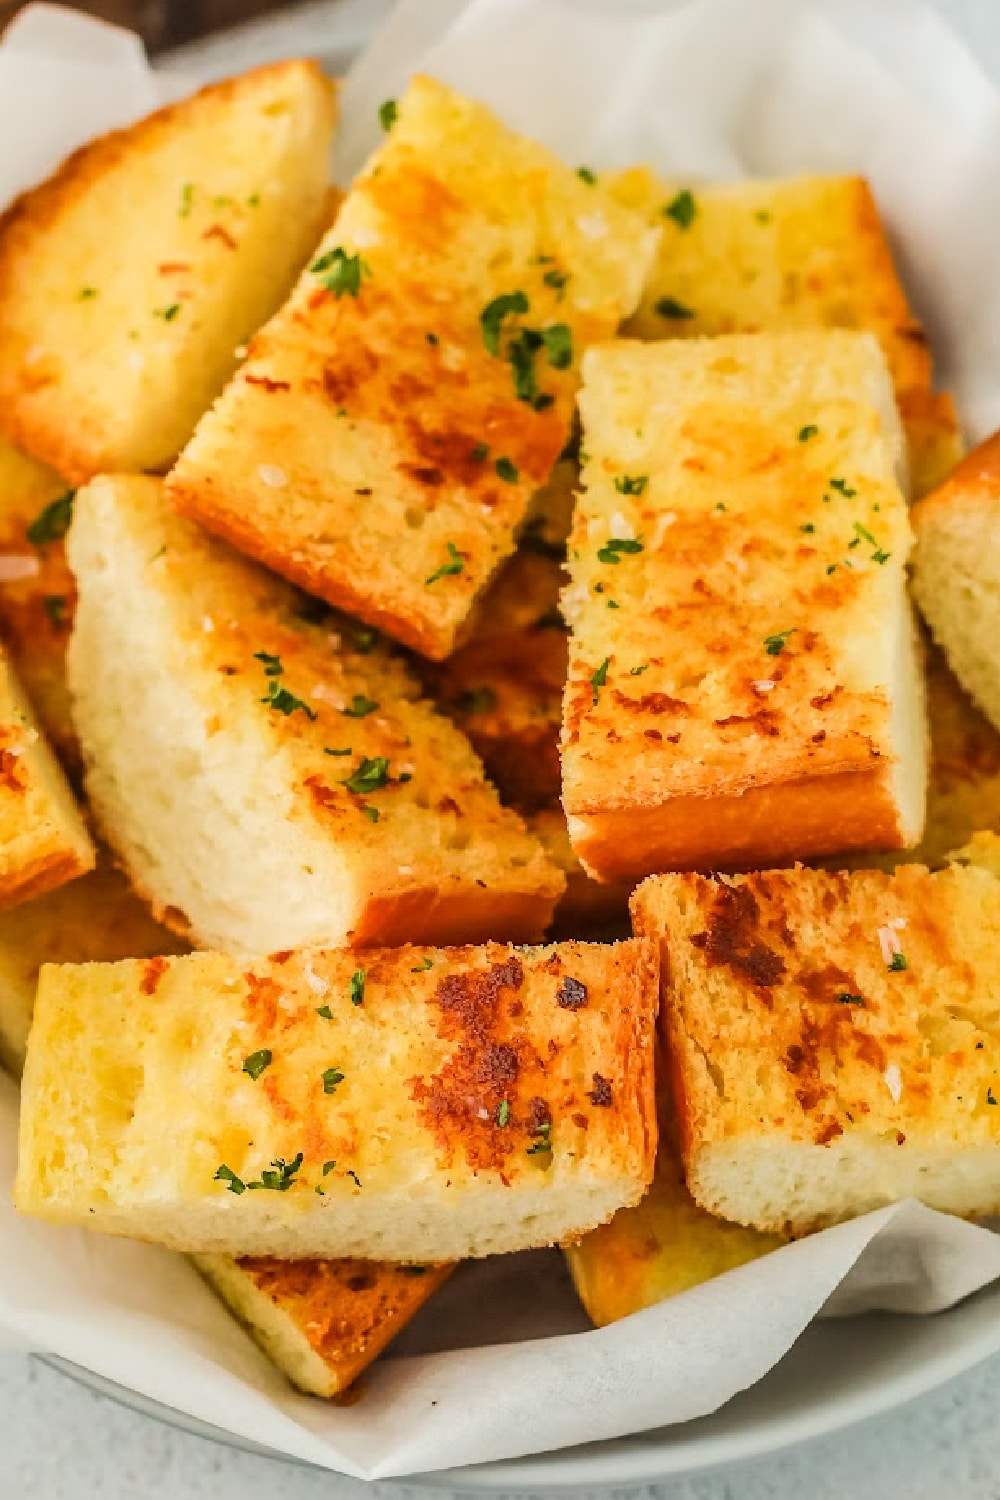 Garlic bread in a basket lined with white parchment paper.